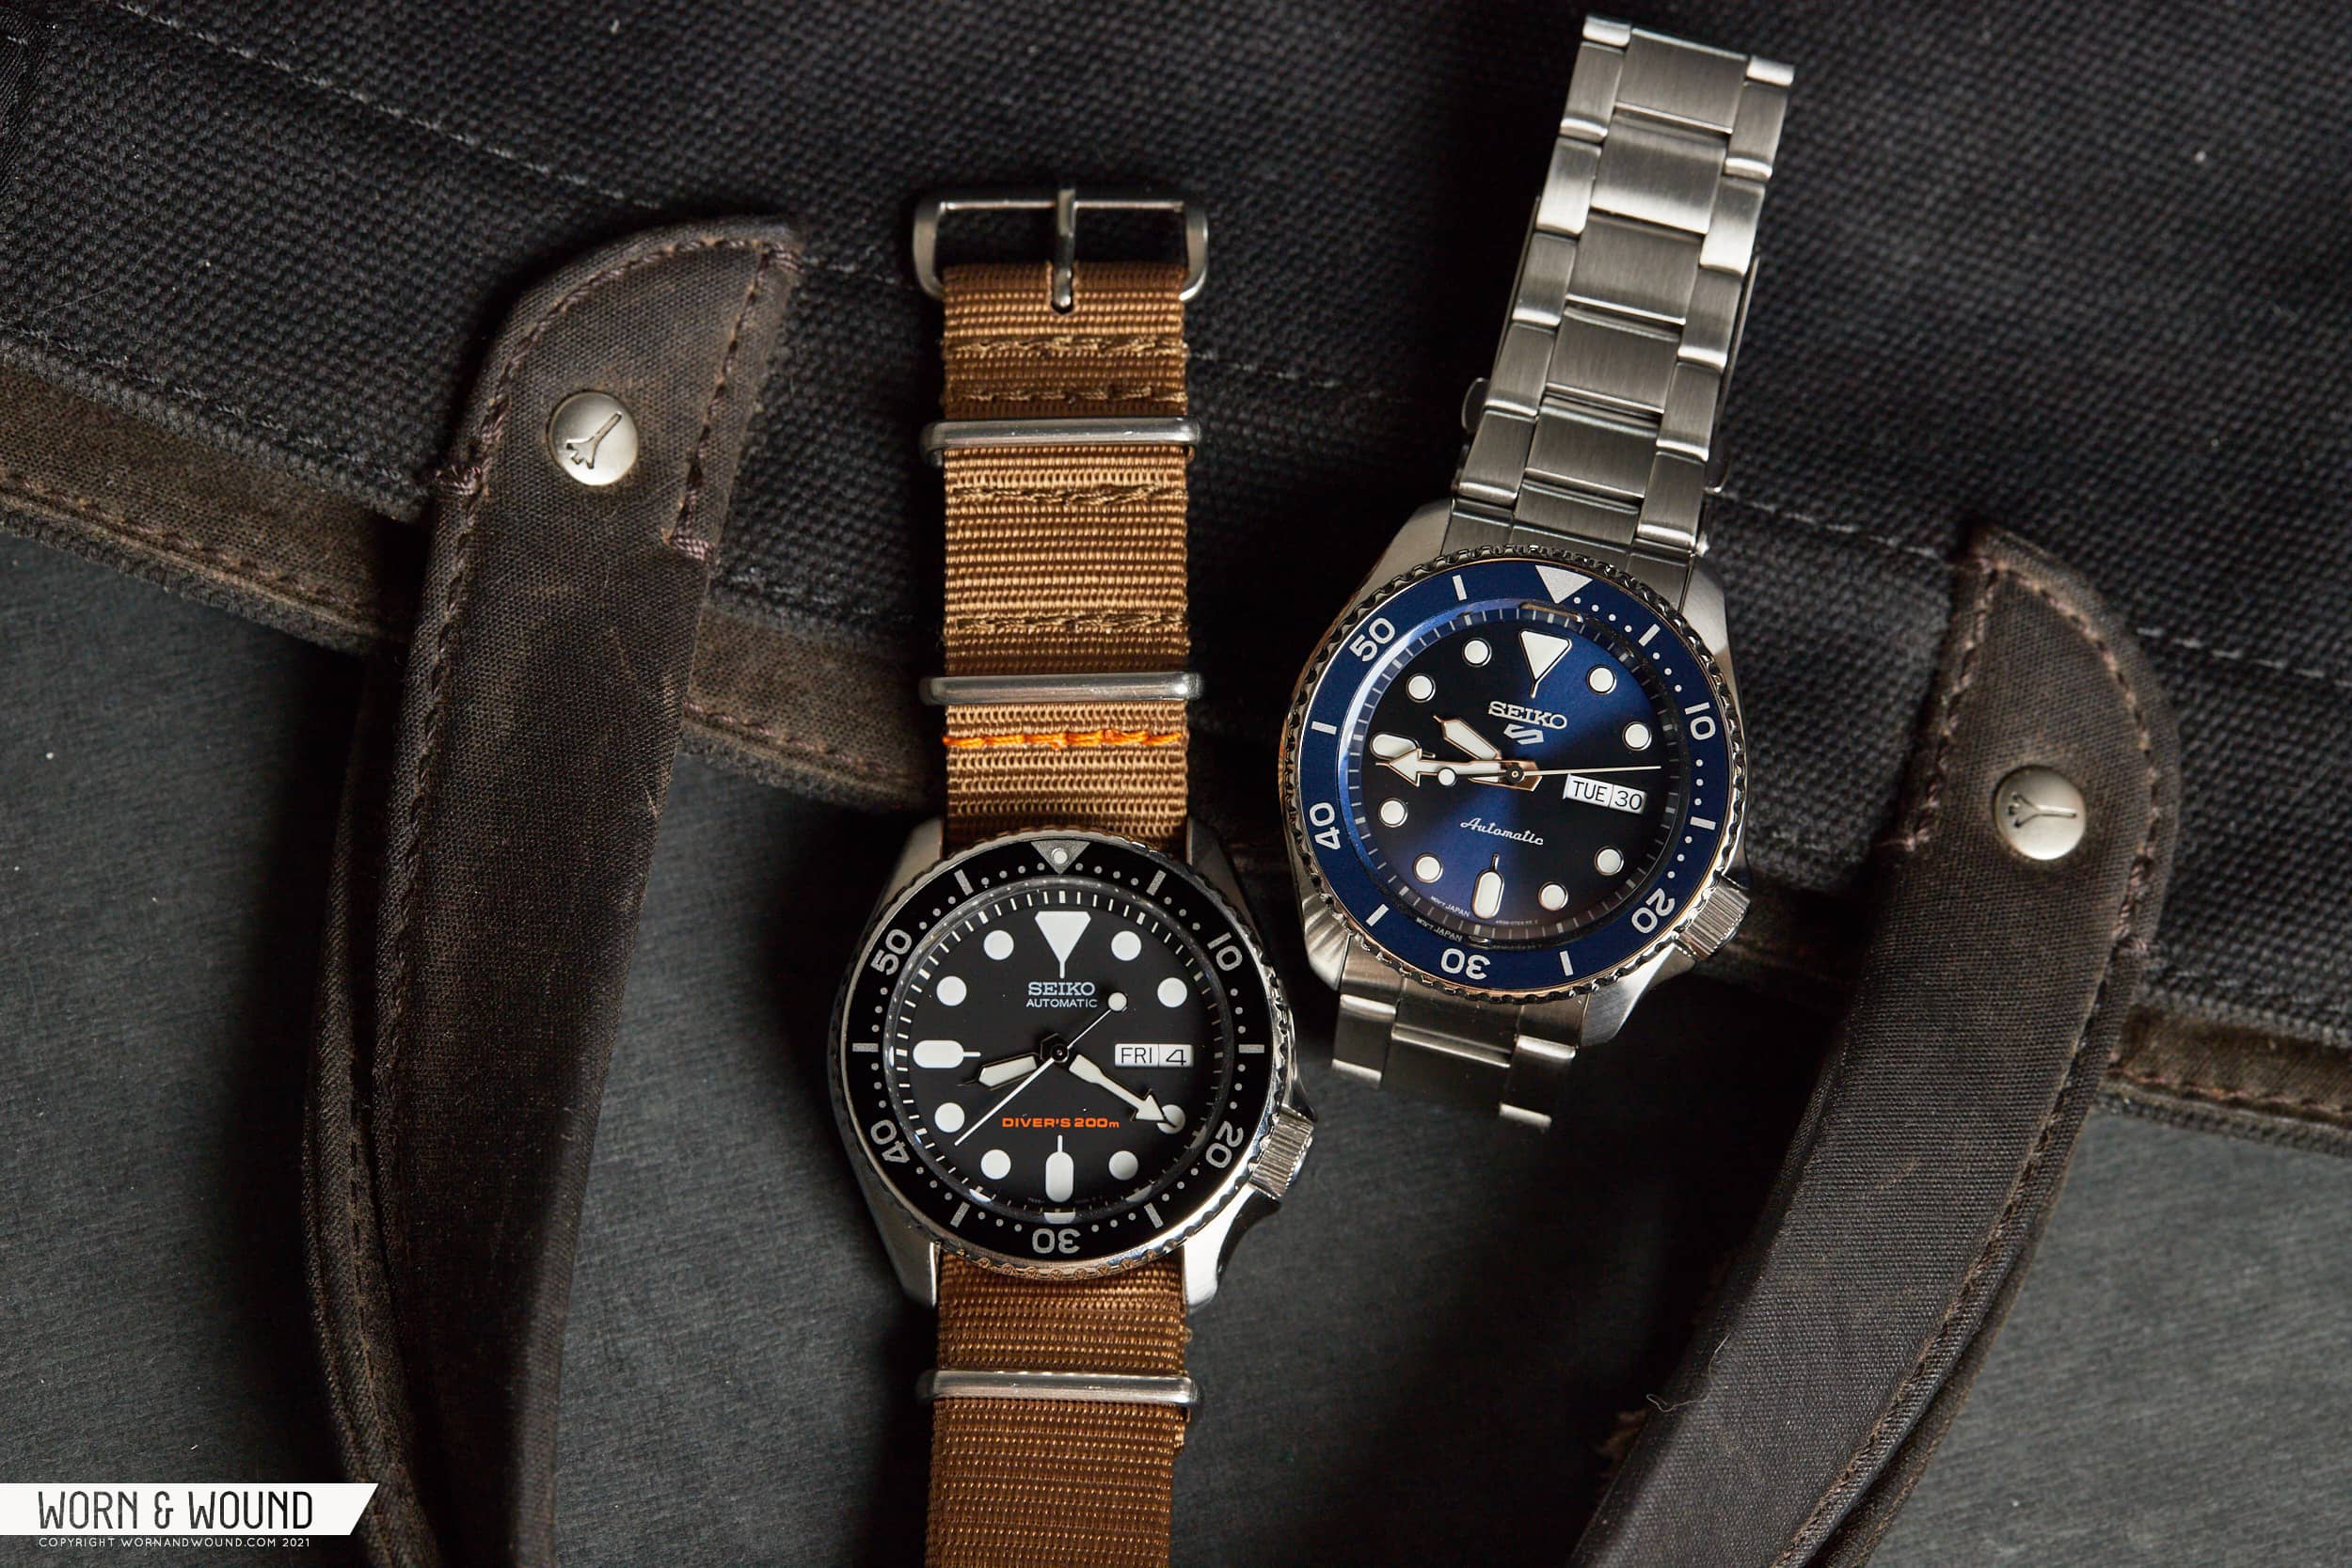 Worn & Wound - 10 Years Later: The Seiko SKX007 As Seen By The W&W Editors